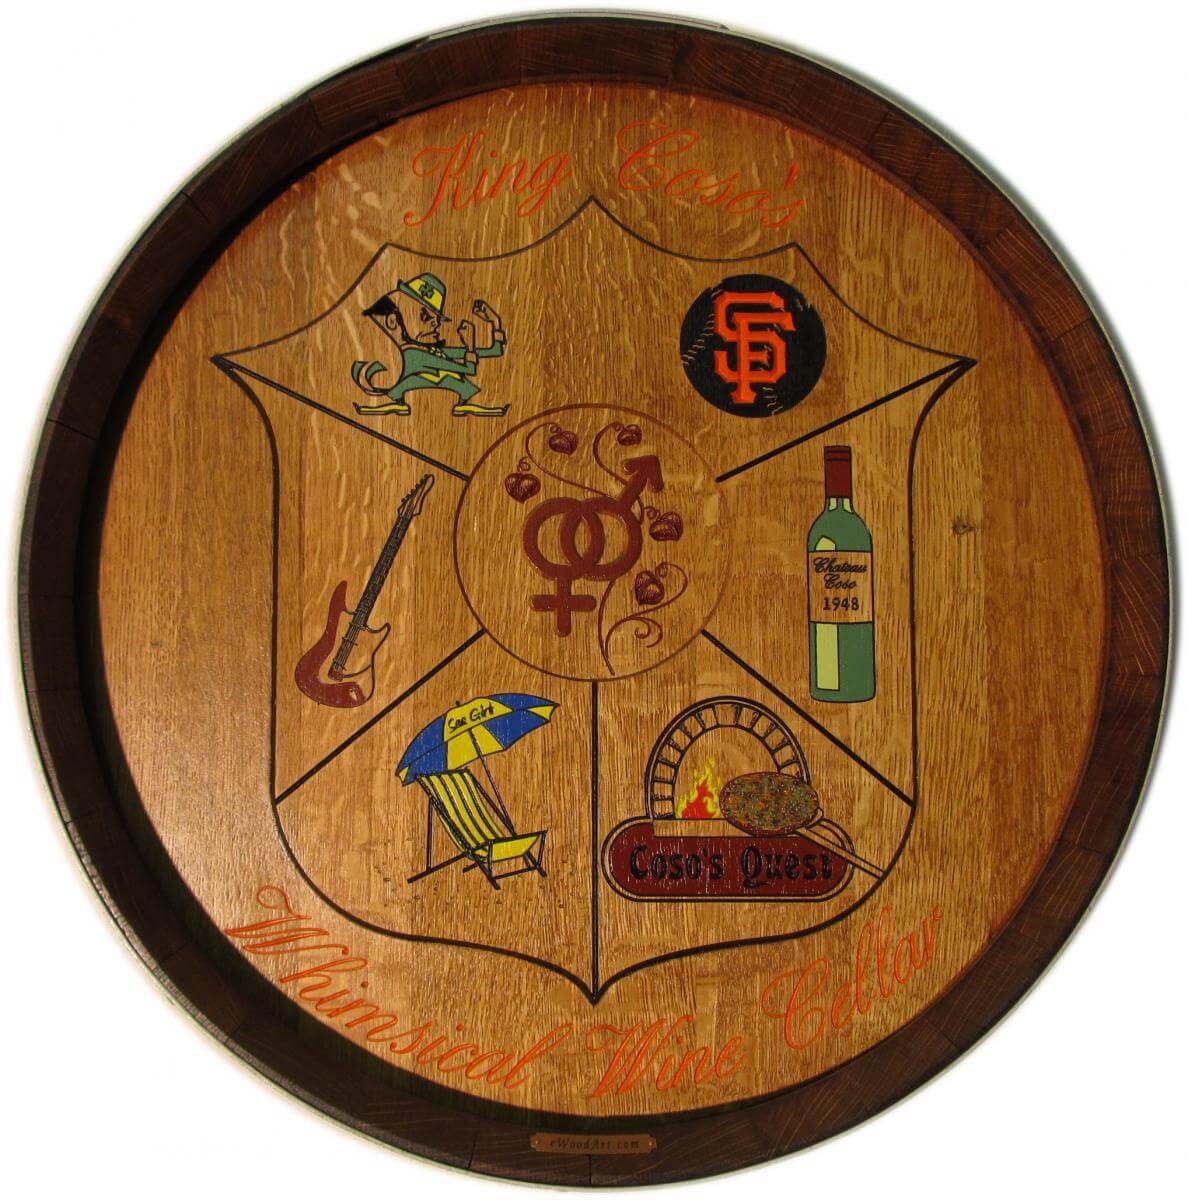 King Coso's Coat Of Arms Barrel Carving